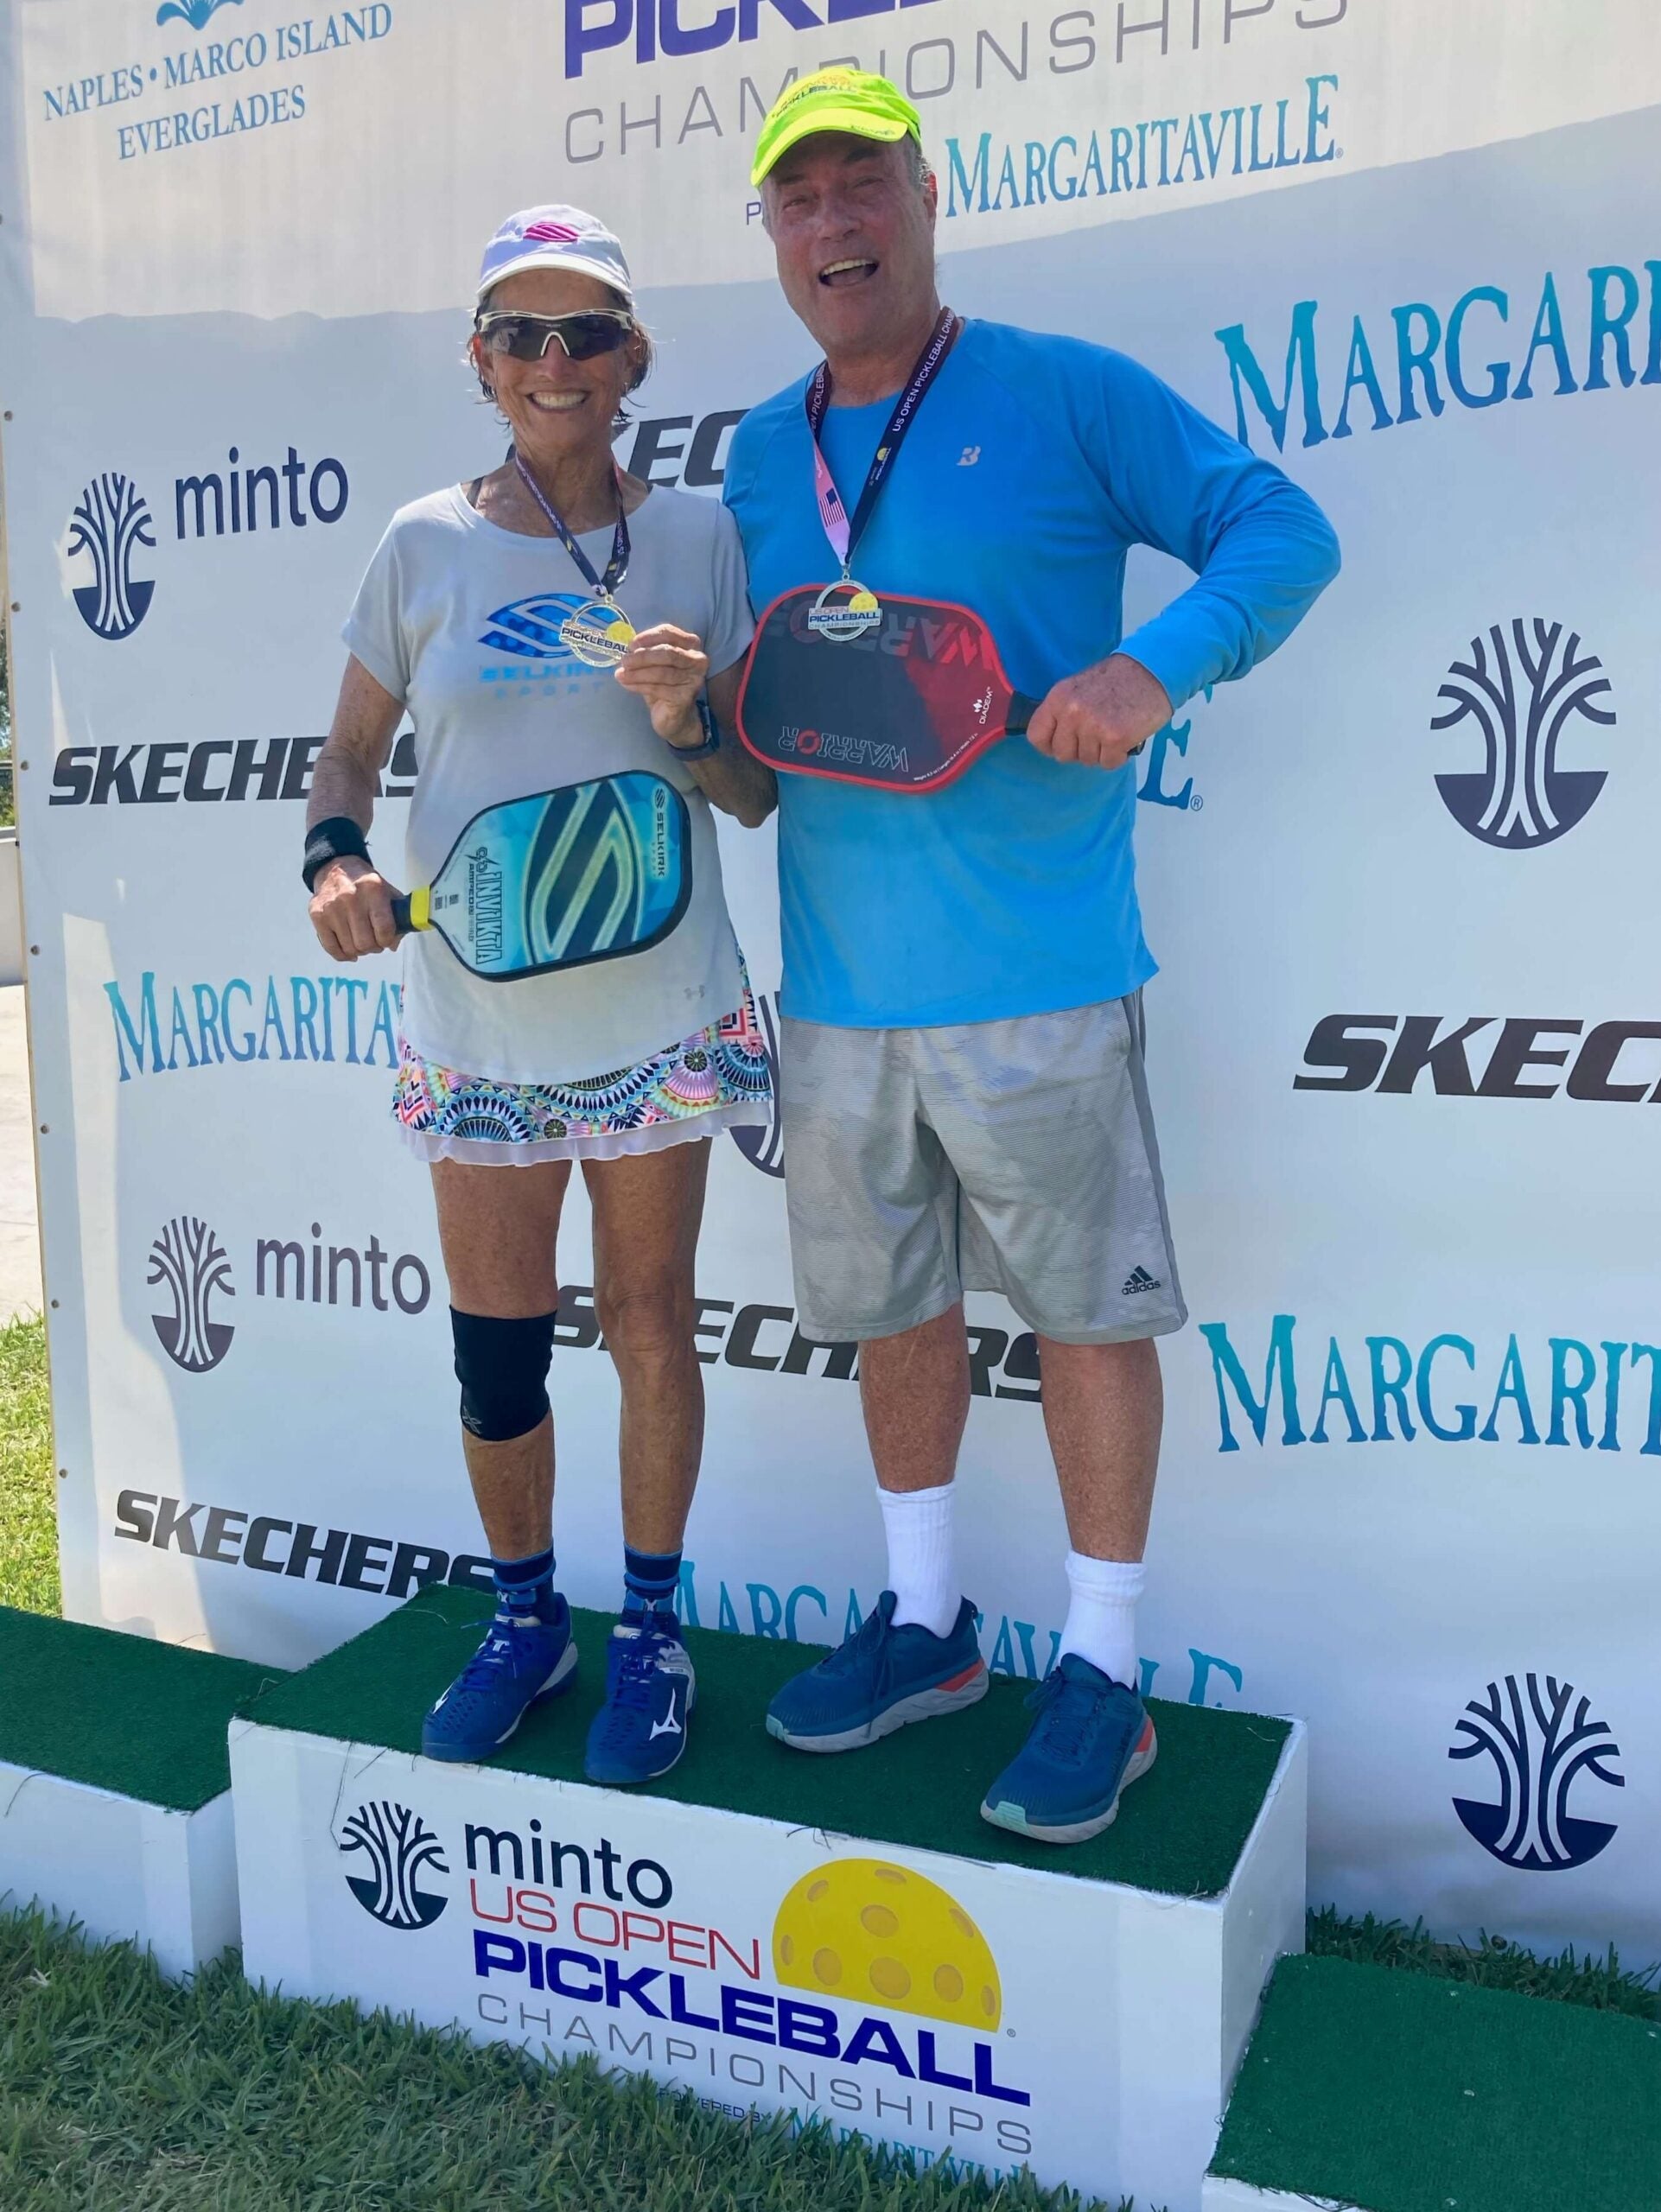 Joanne Russell winning the US Open Pickleball Mixed Doubles<br>